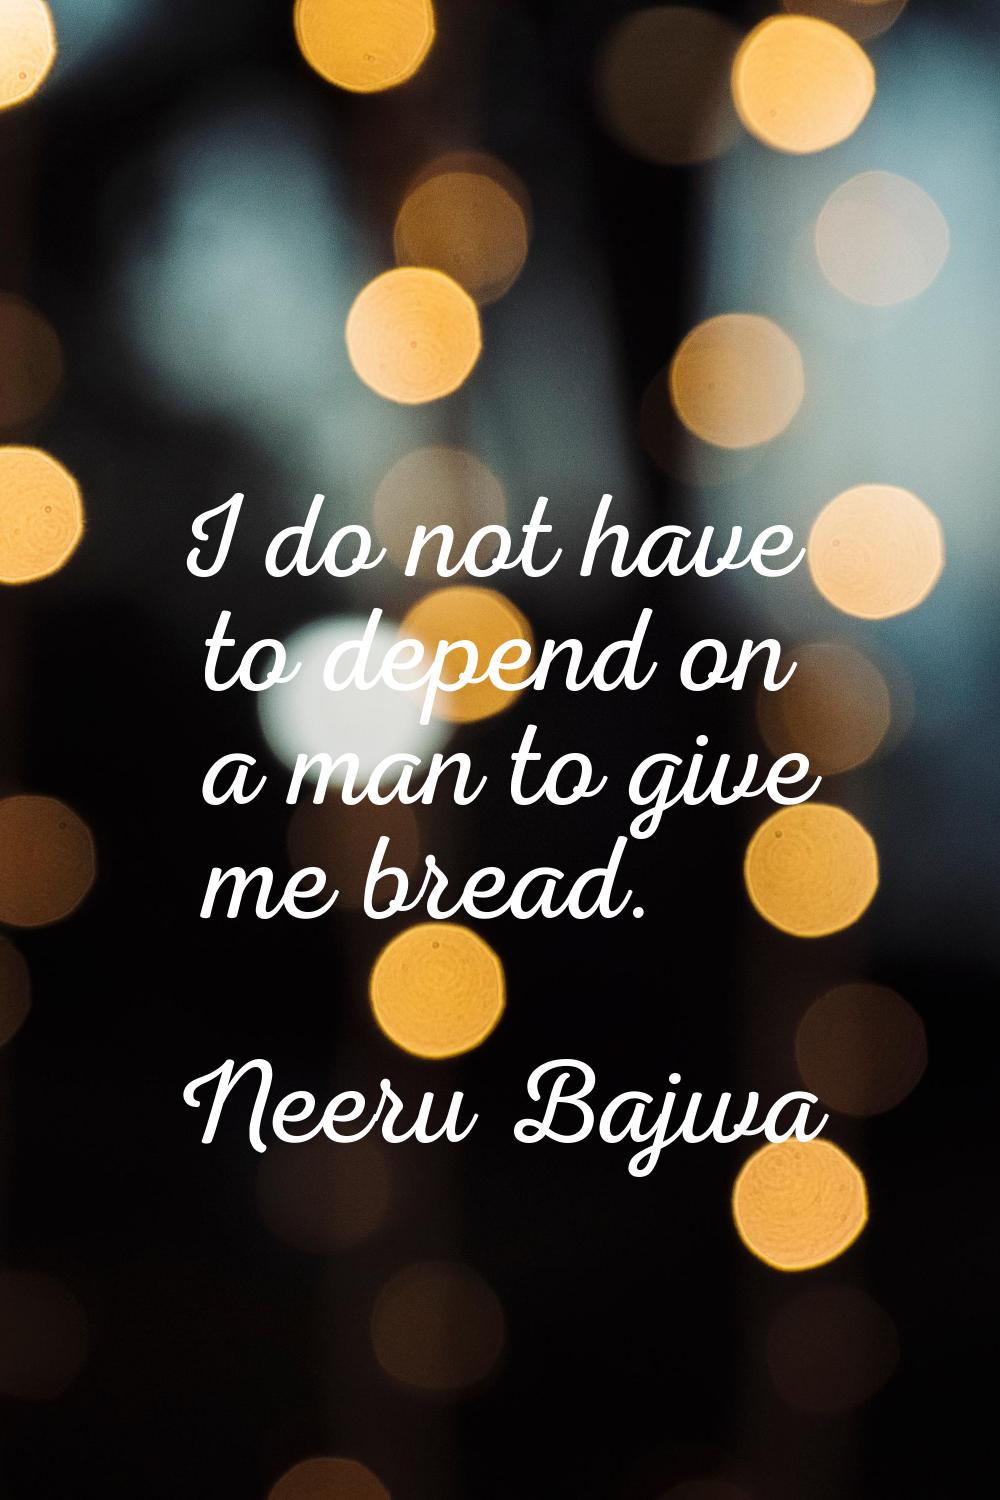 I do not have to depend on a man to give me bread.